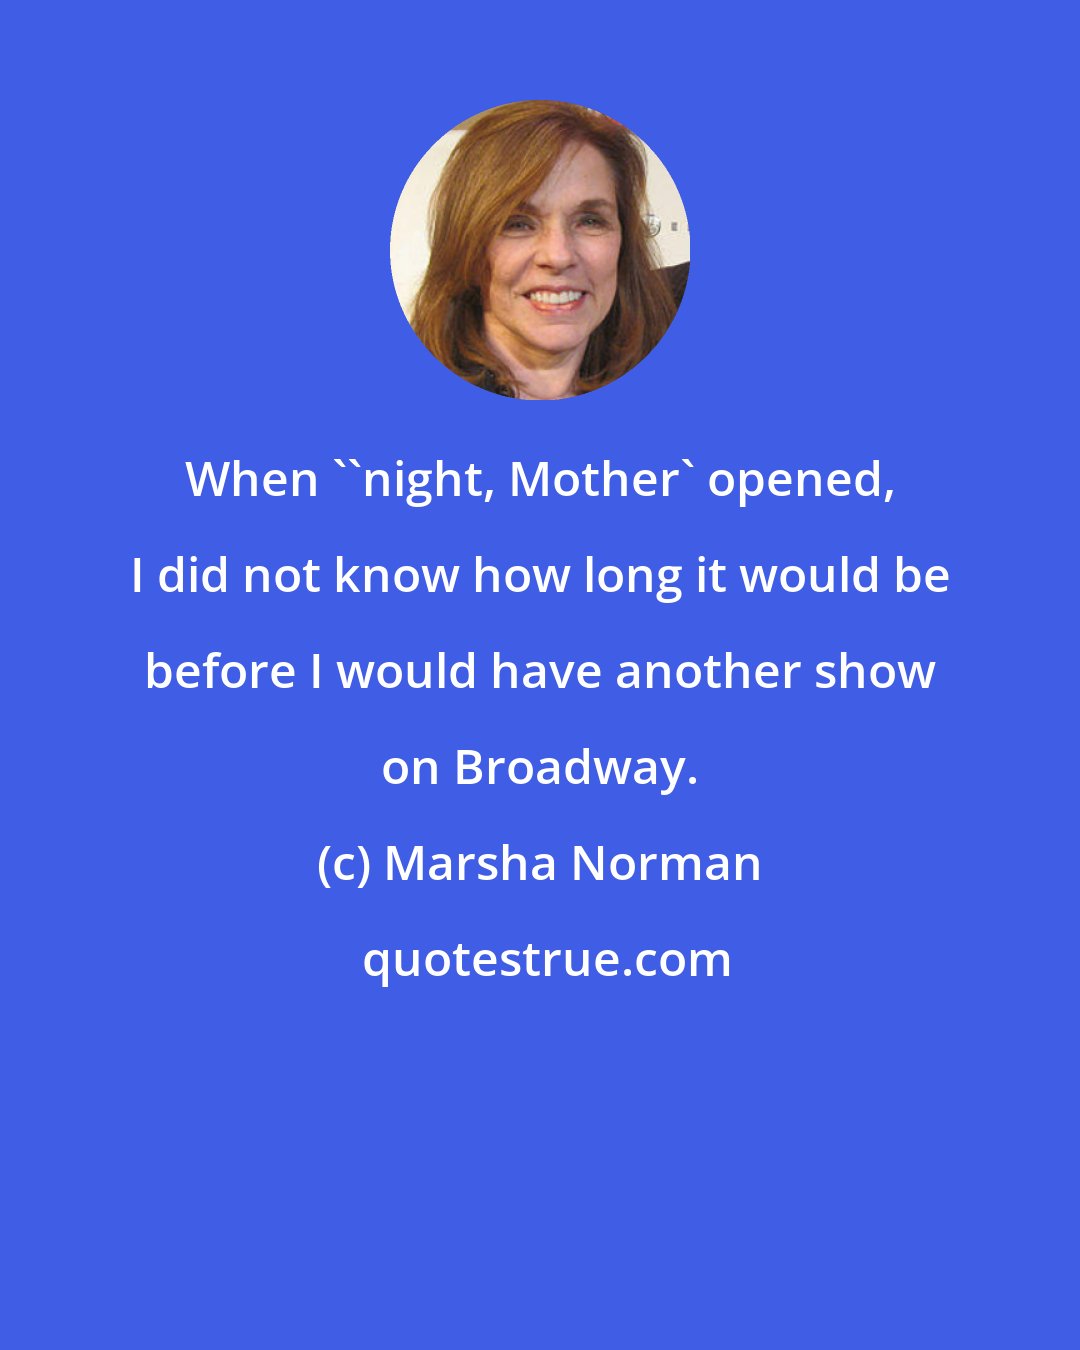 Marsha Norman: When ''night, Mother' opened, I did not know how long it would be before I would have another show on Broadway.